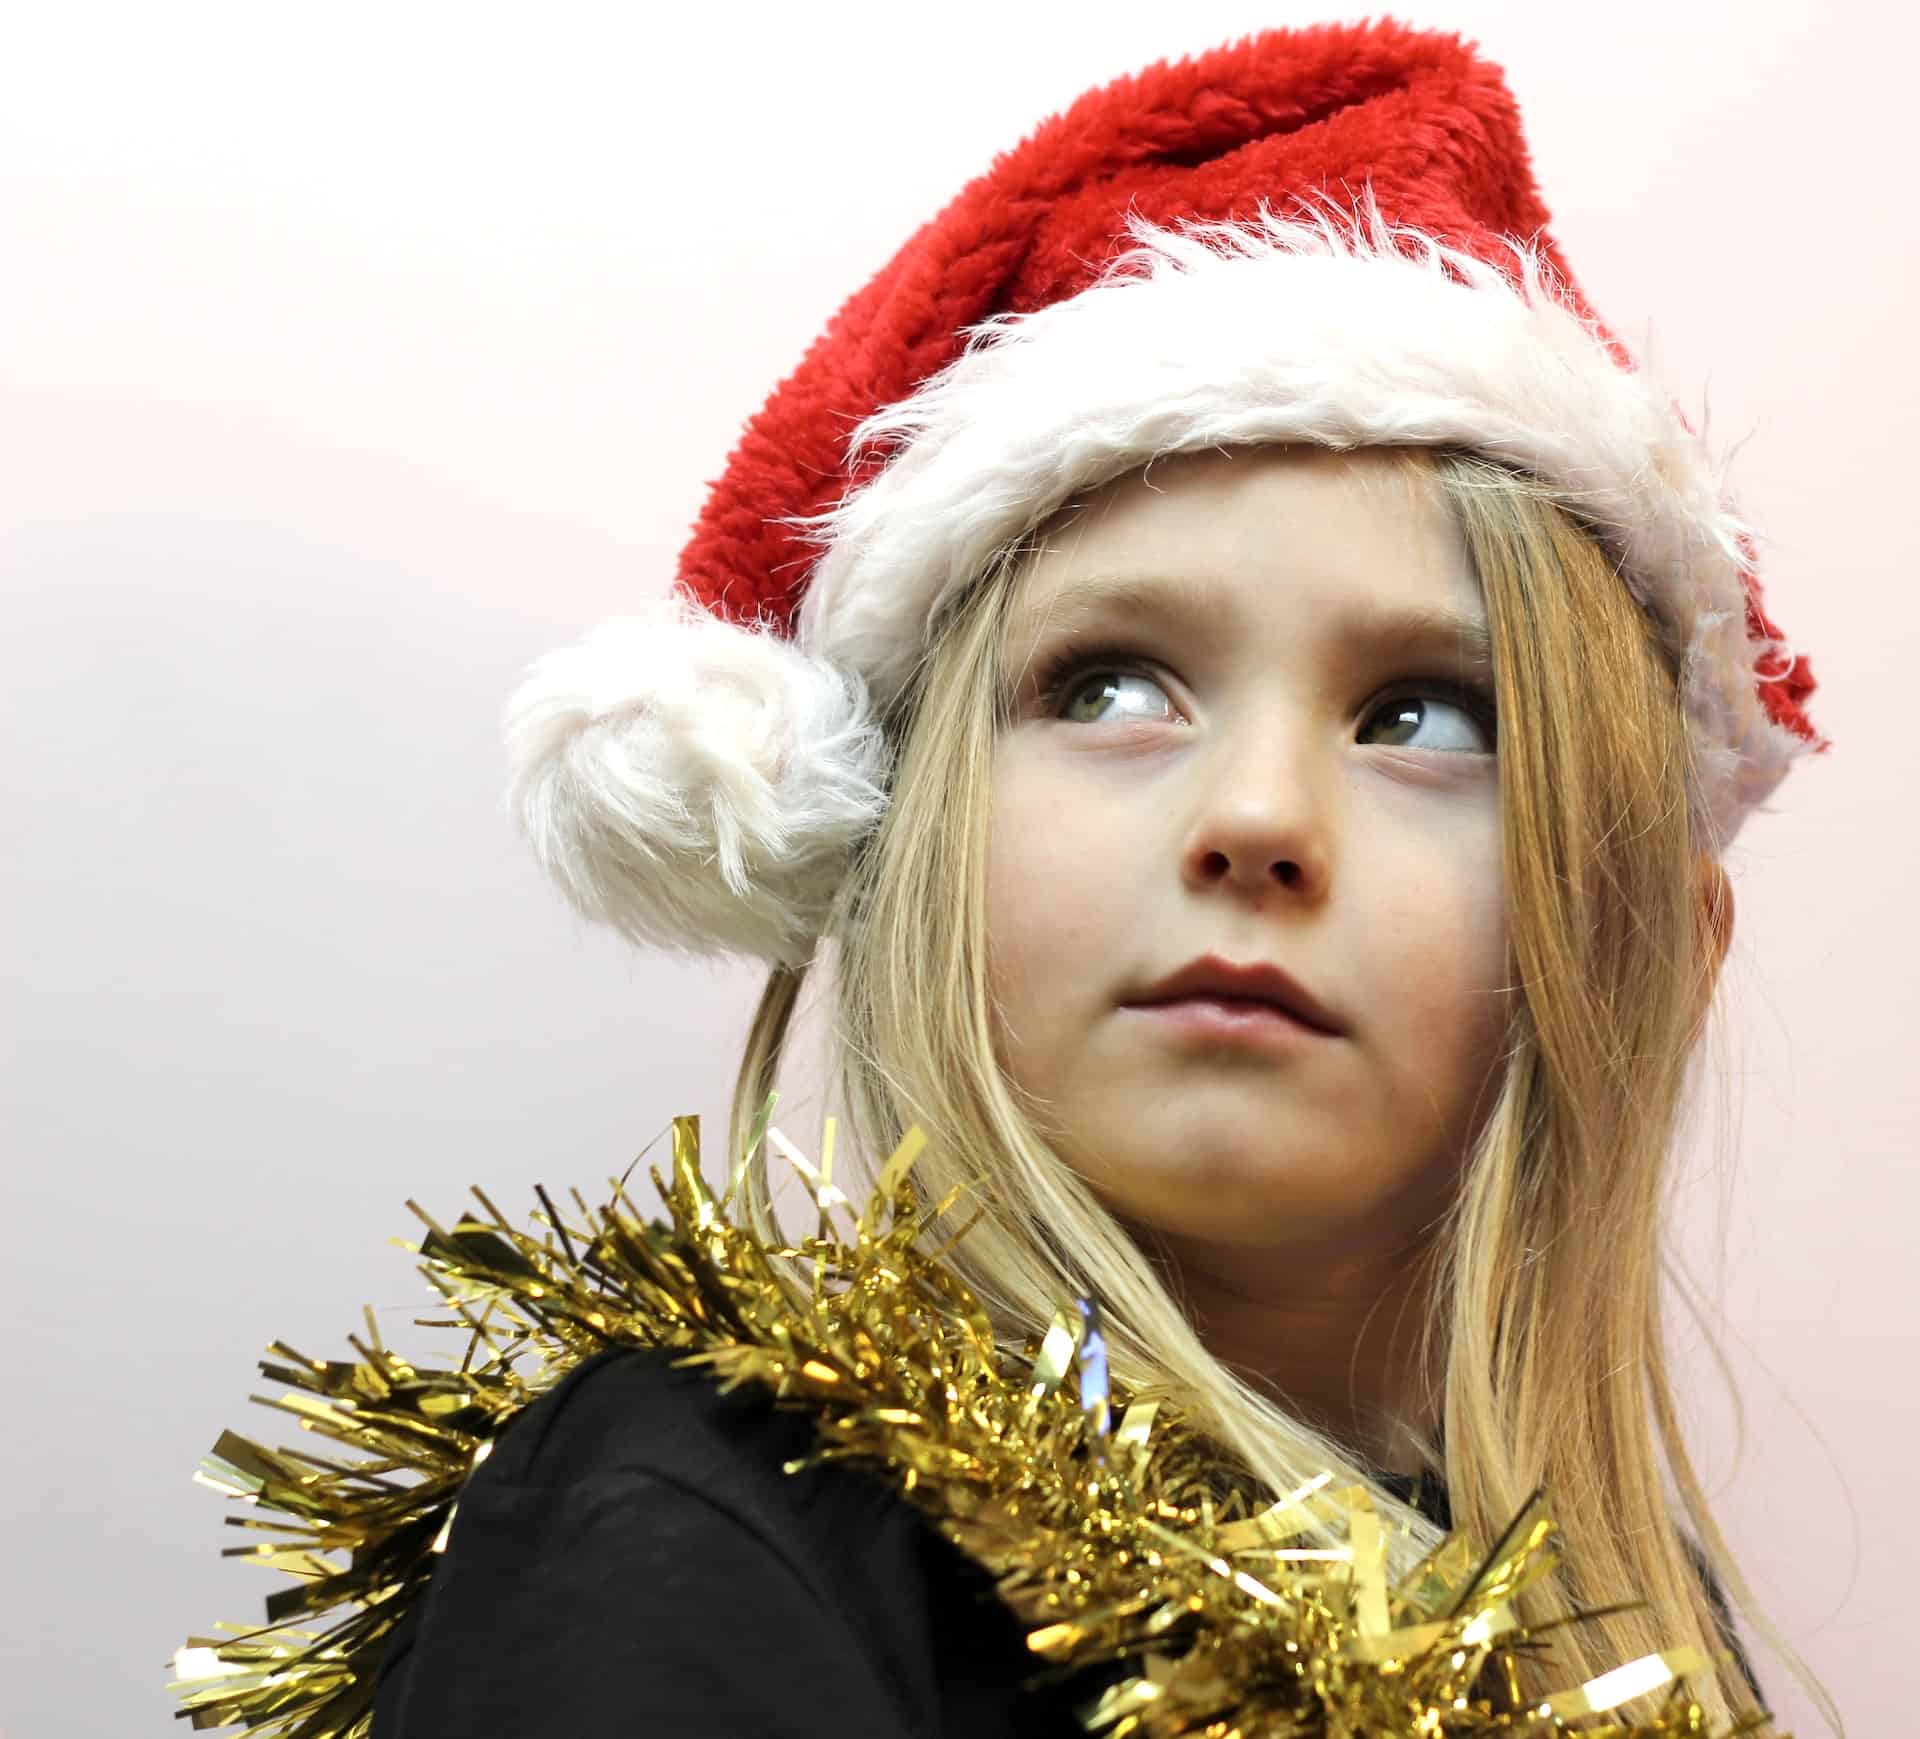 child with xmas hat and tinsel on looking to the sky